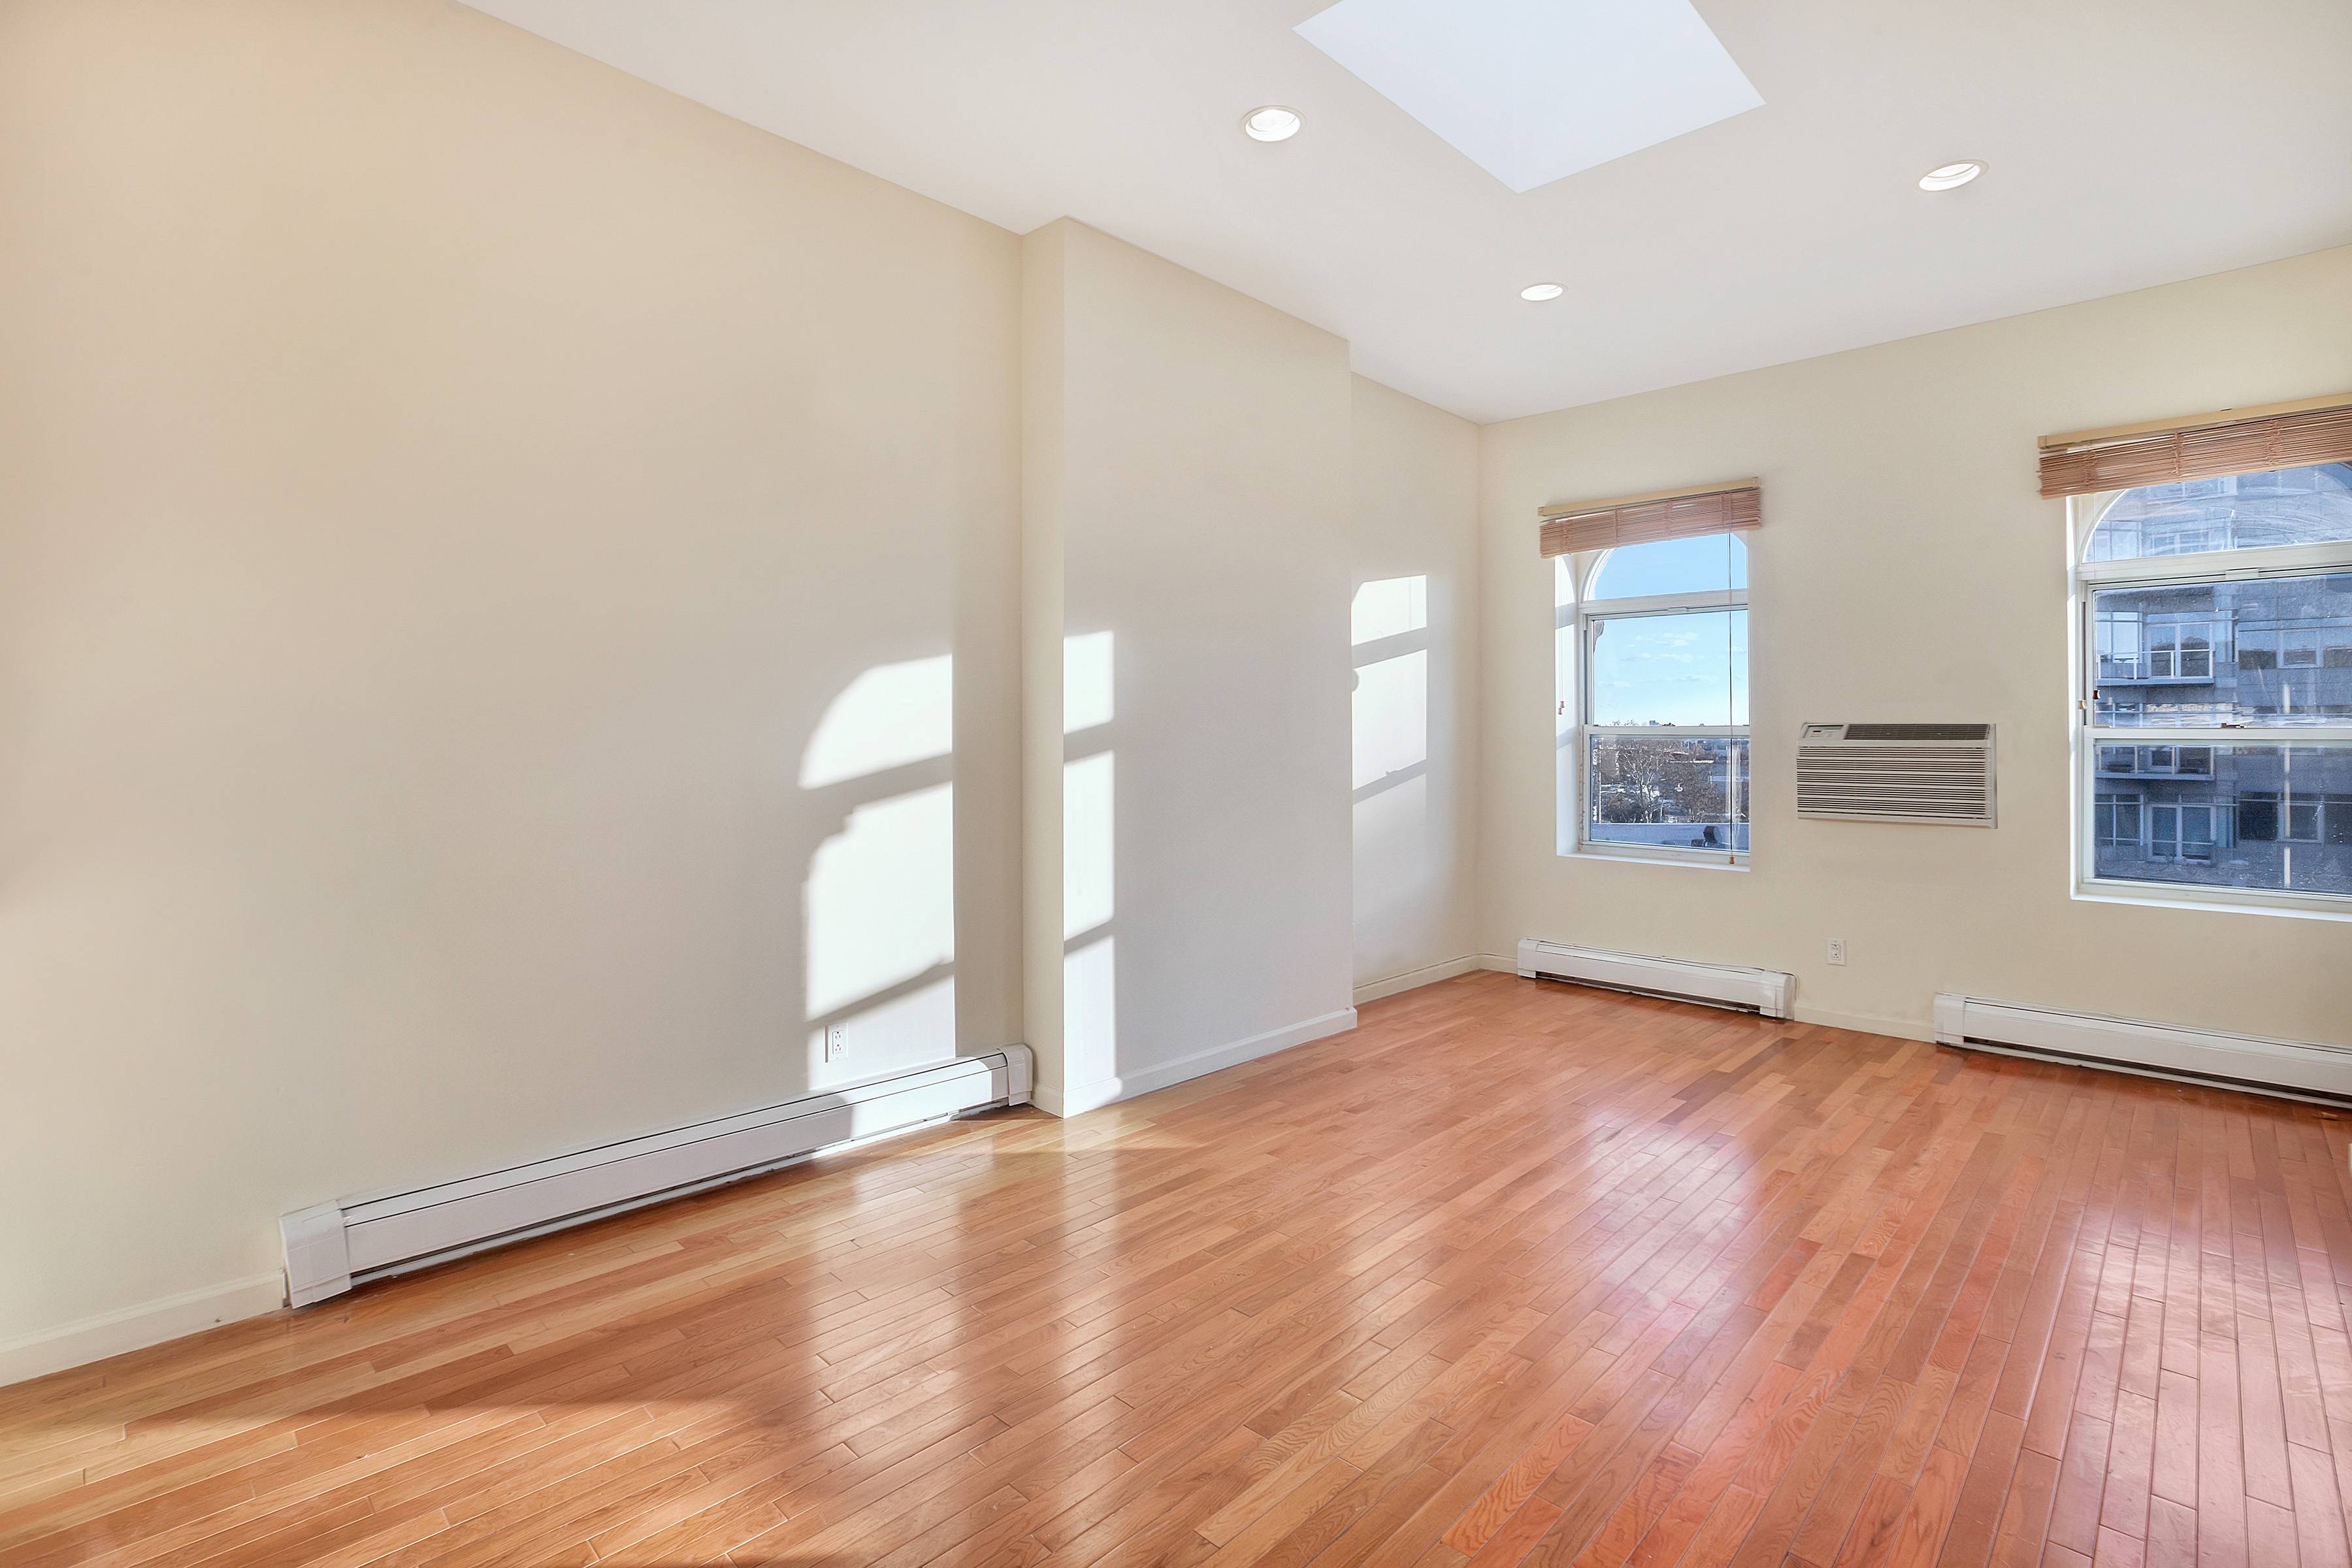 Hunters Point Stunning PH Apartment 3BR/2BA 10FT Ceilings Sun-Blasted 3 Skylights LOFT Like With Roof Access